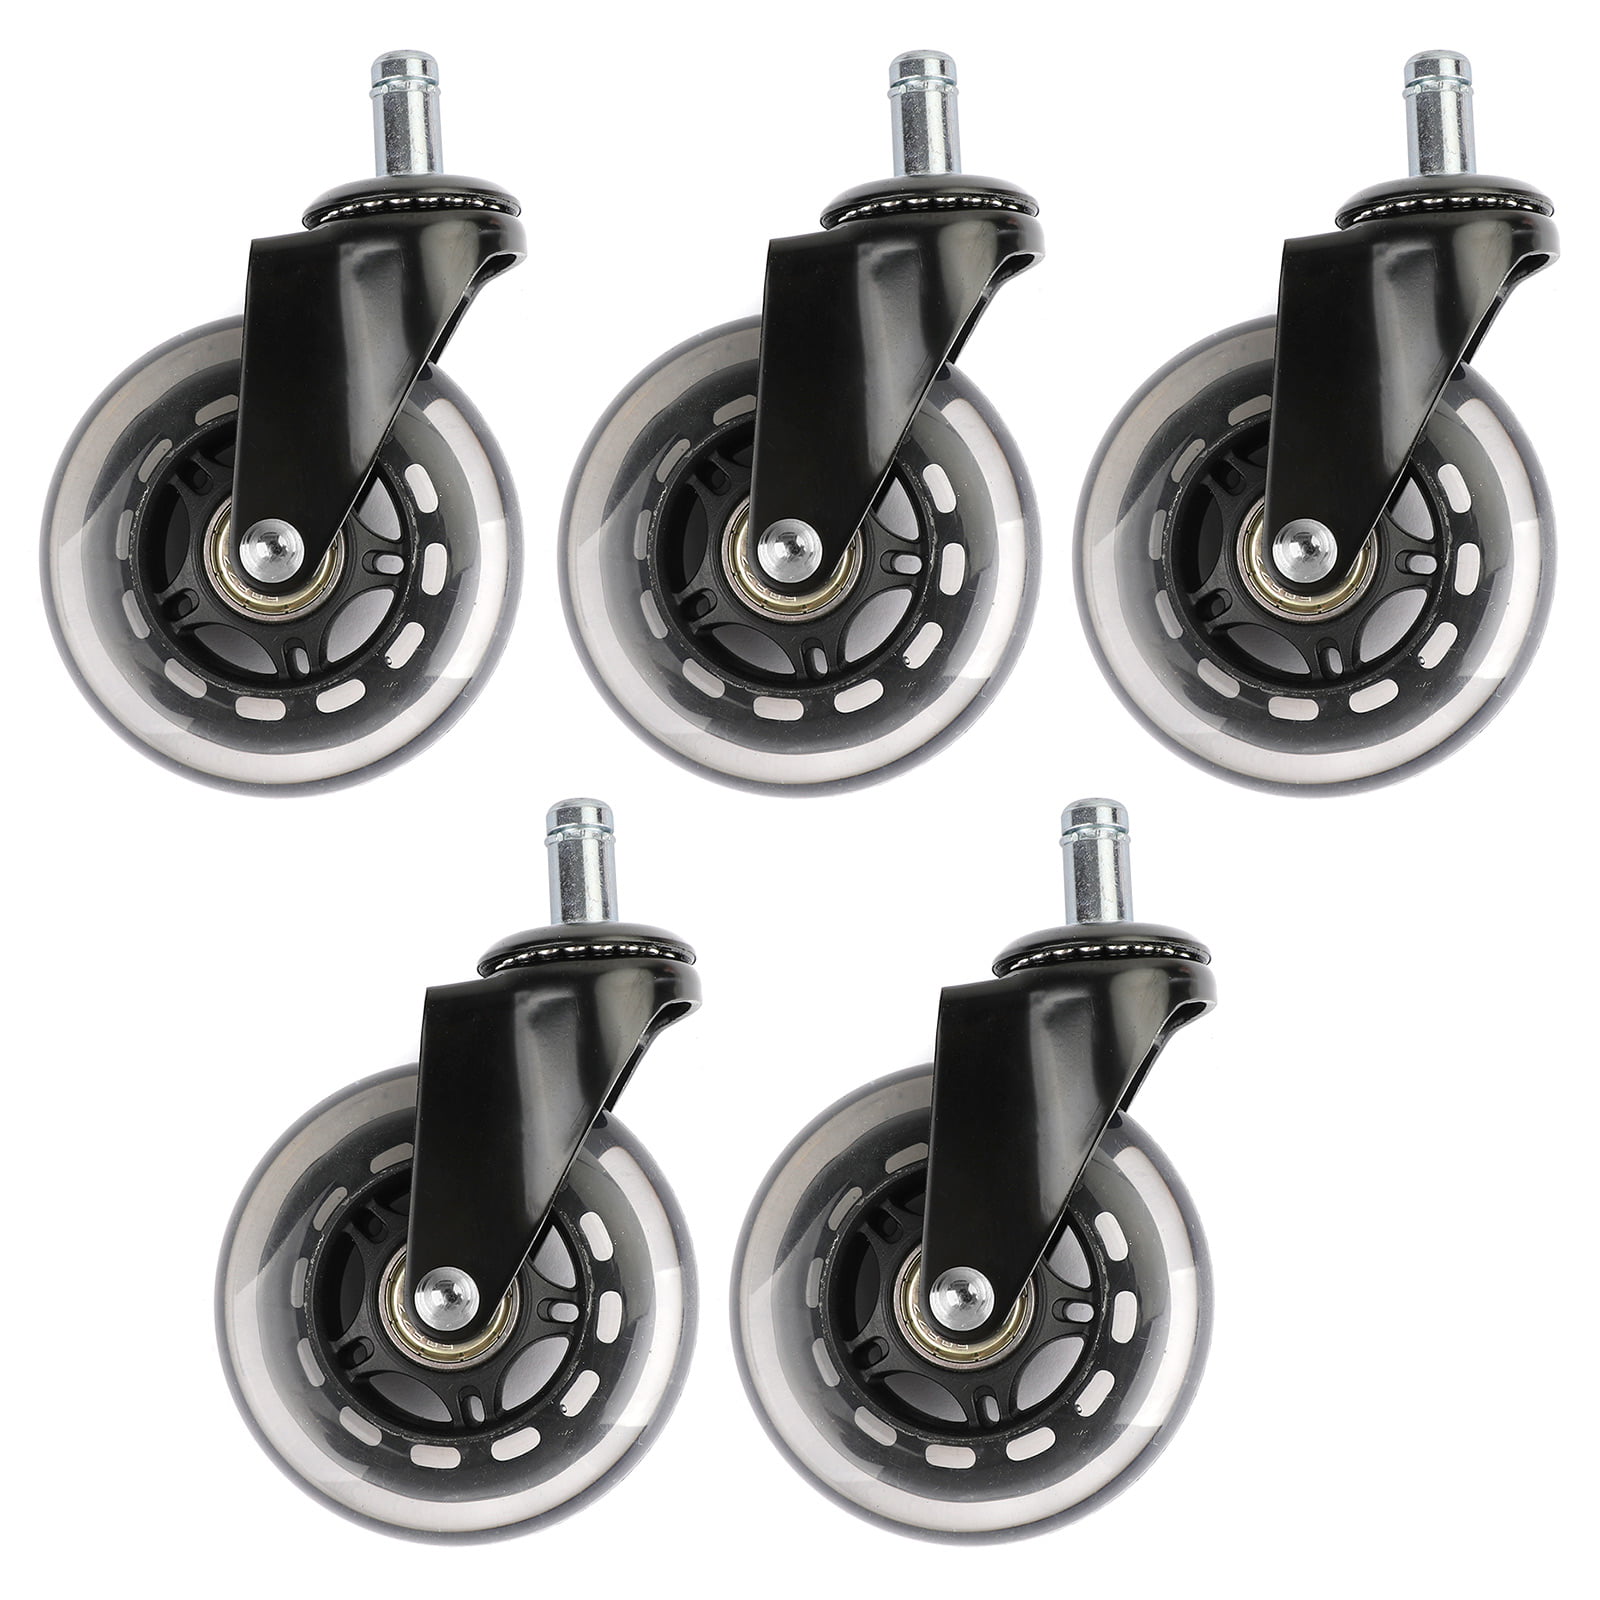 5Pcs Office Chair Caster PU Swivel Roller Wheels Replacement Heavy Duty 3 inch 